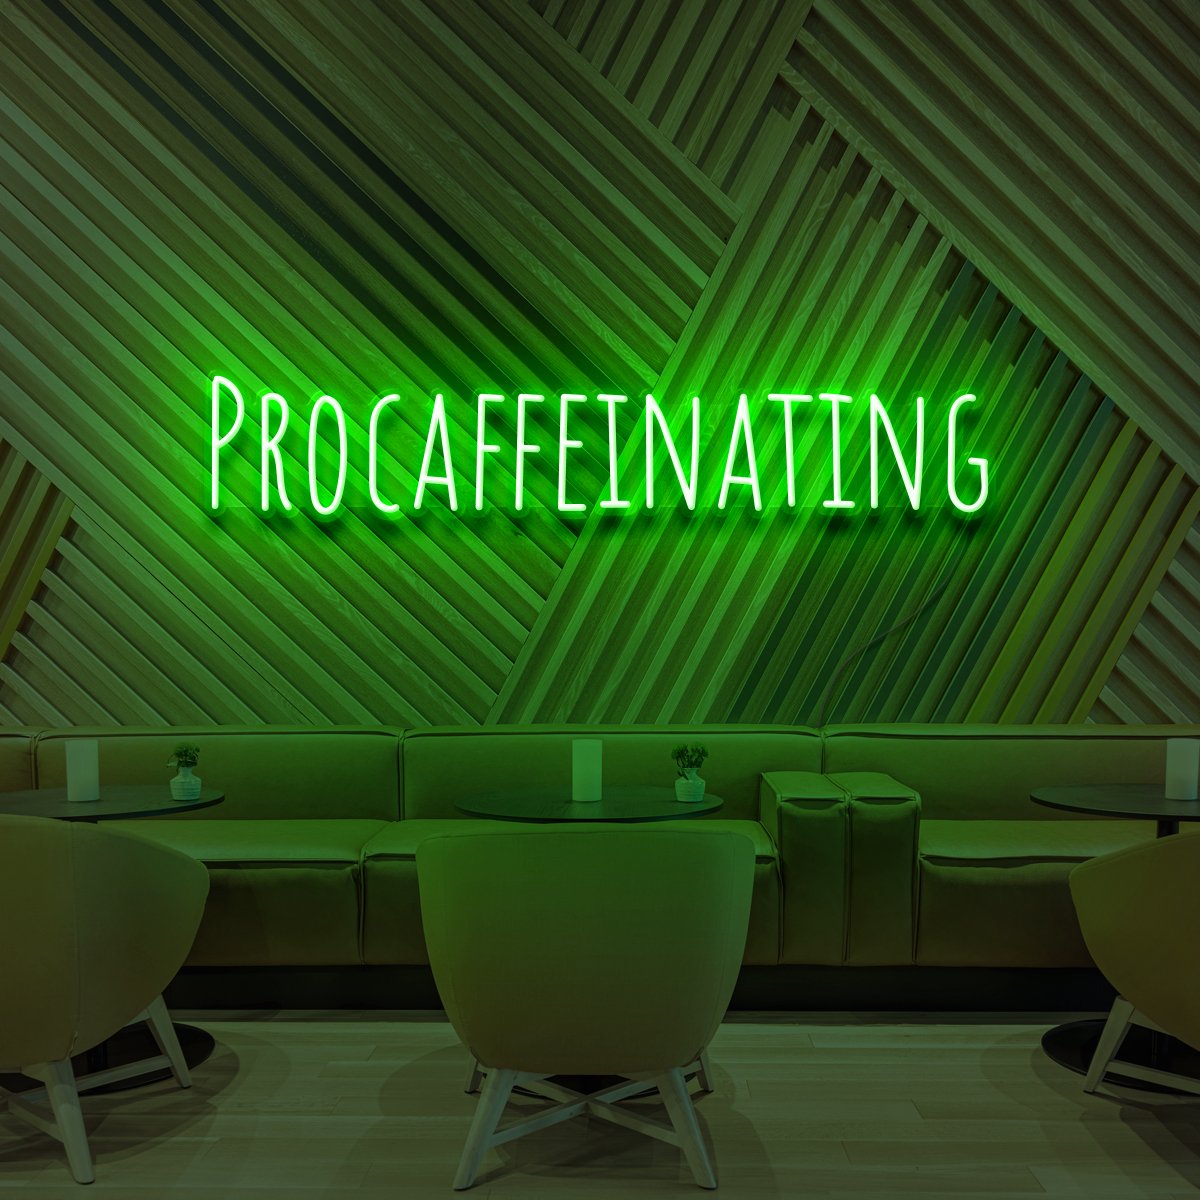 "Procaffeinating" Neon Sign for Cafés 60cm (2ft) / Green / LED Neon by Neon Icons